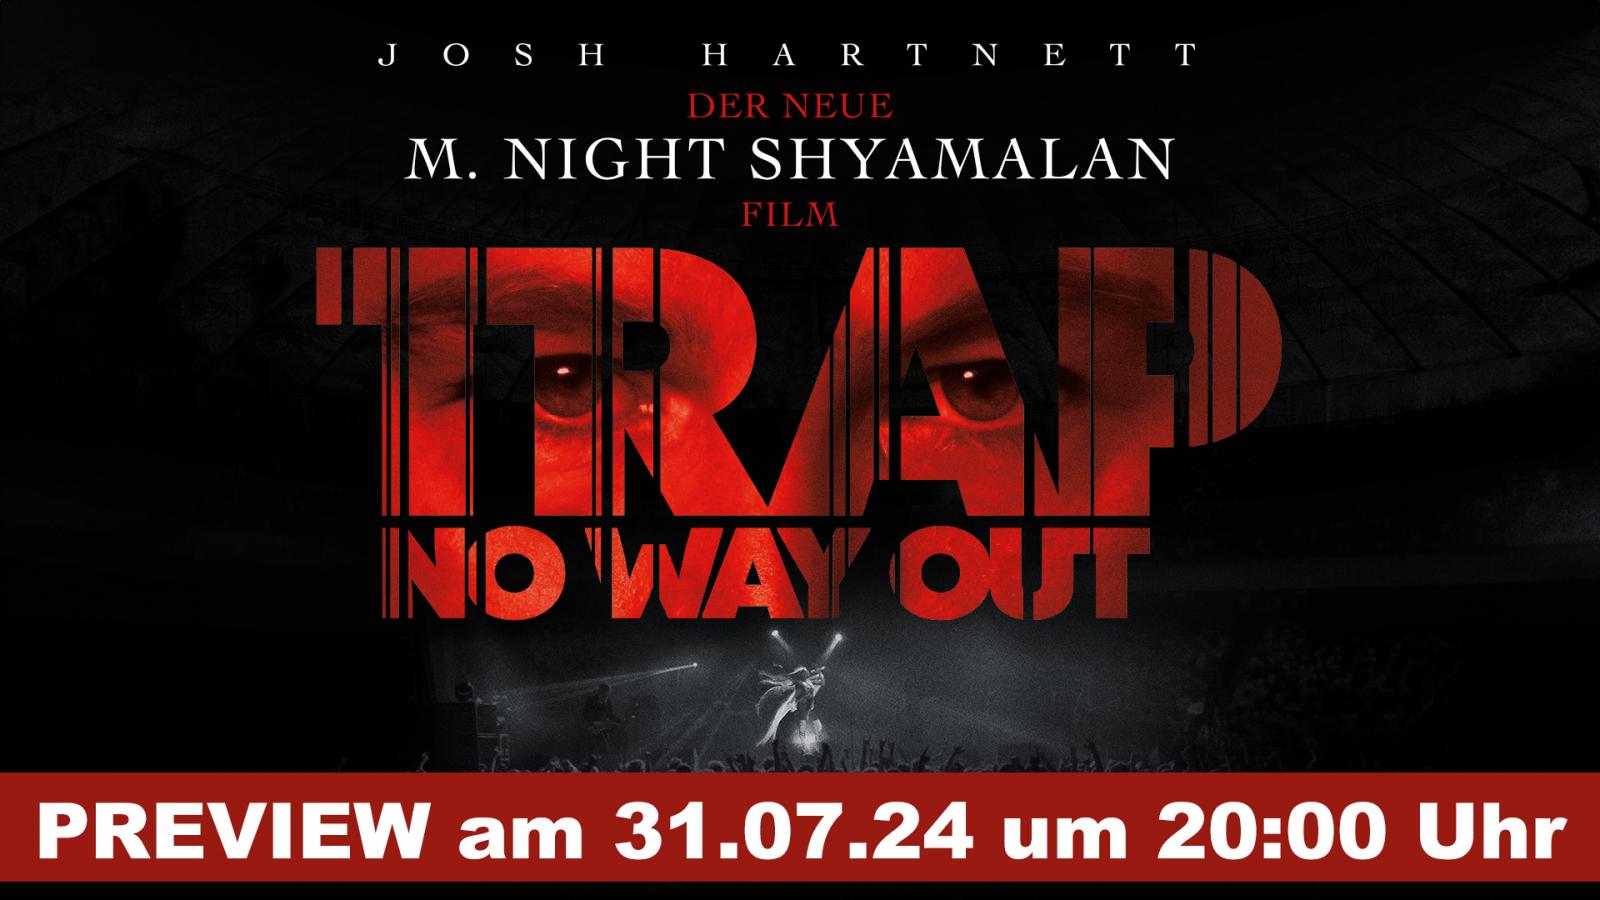 PREVIEW: "TRAP - No Way out"